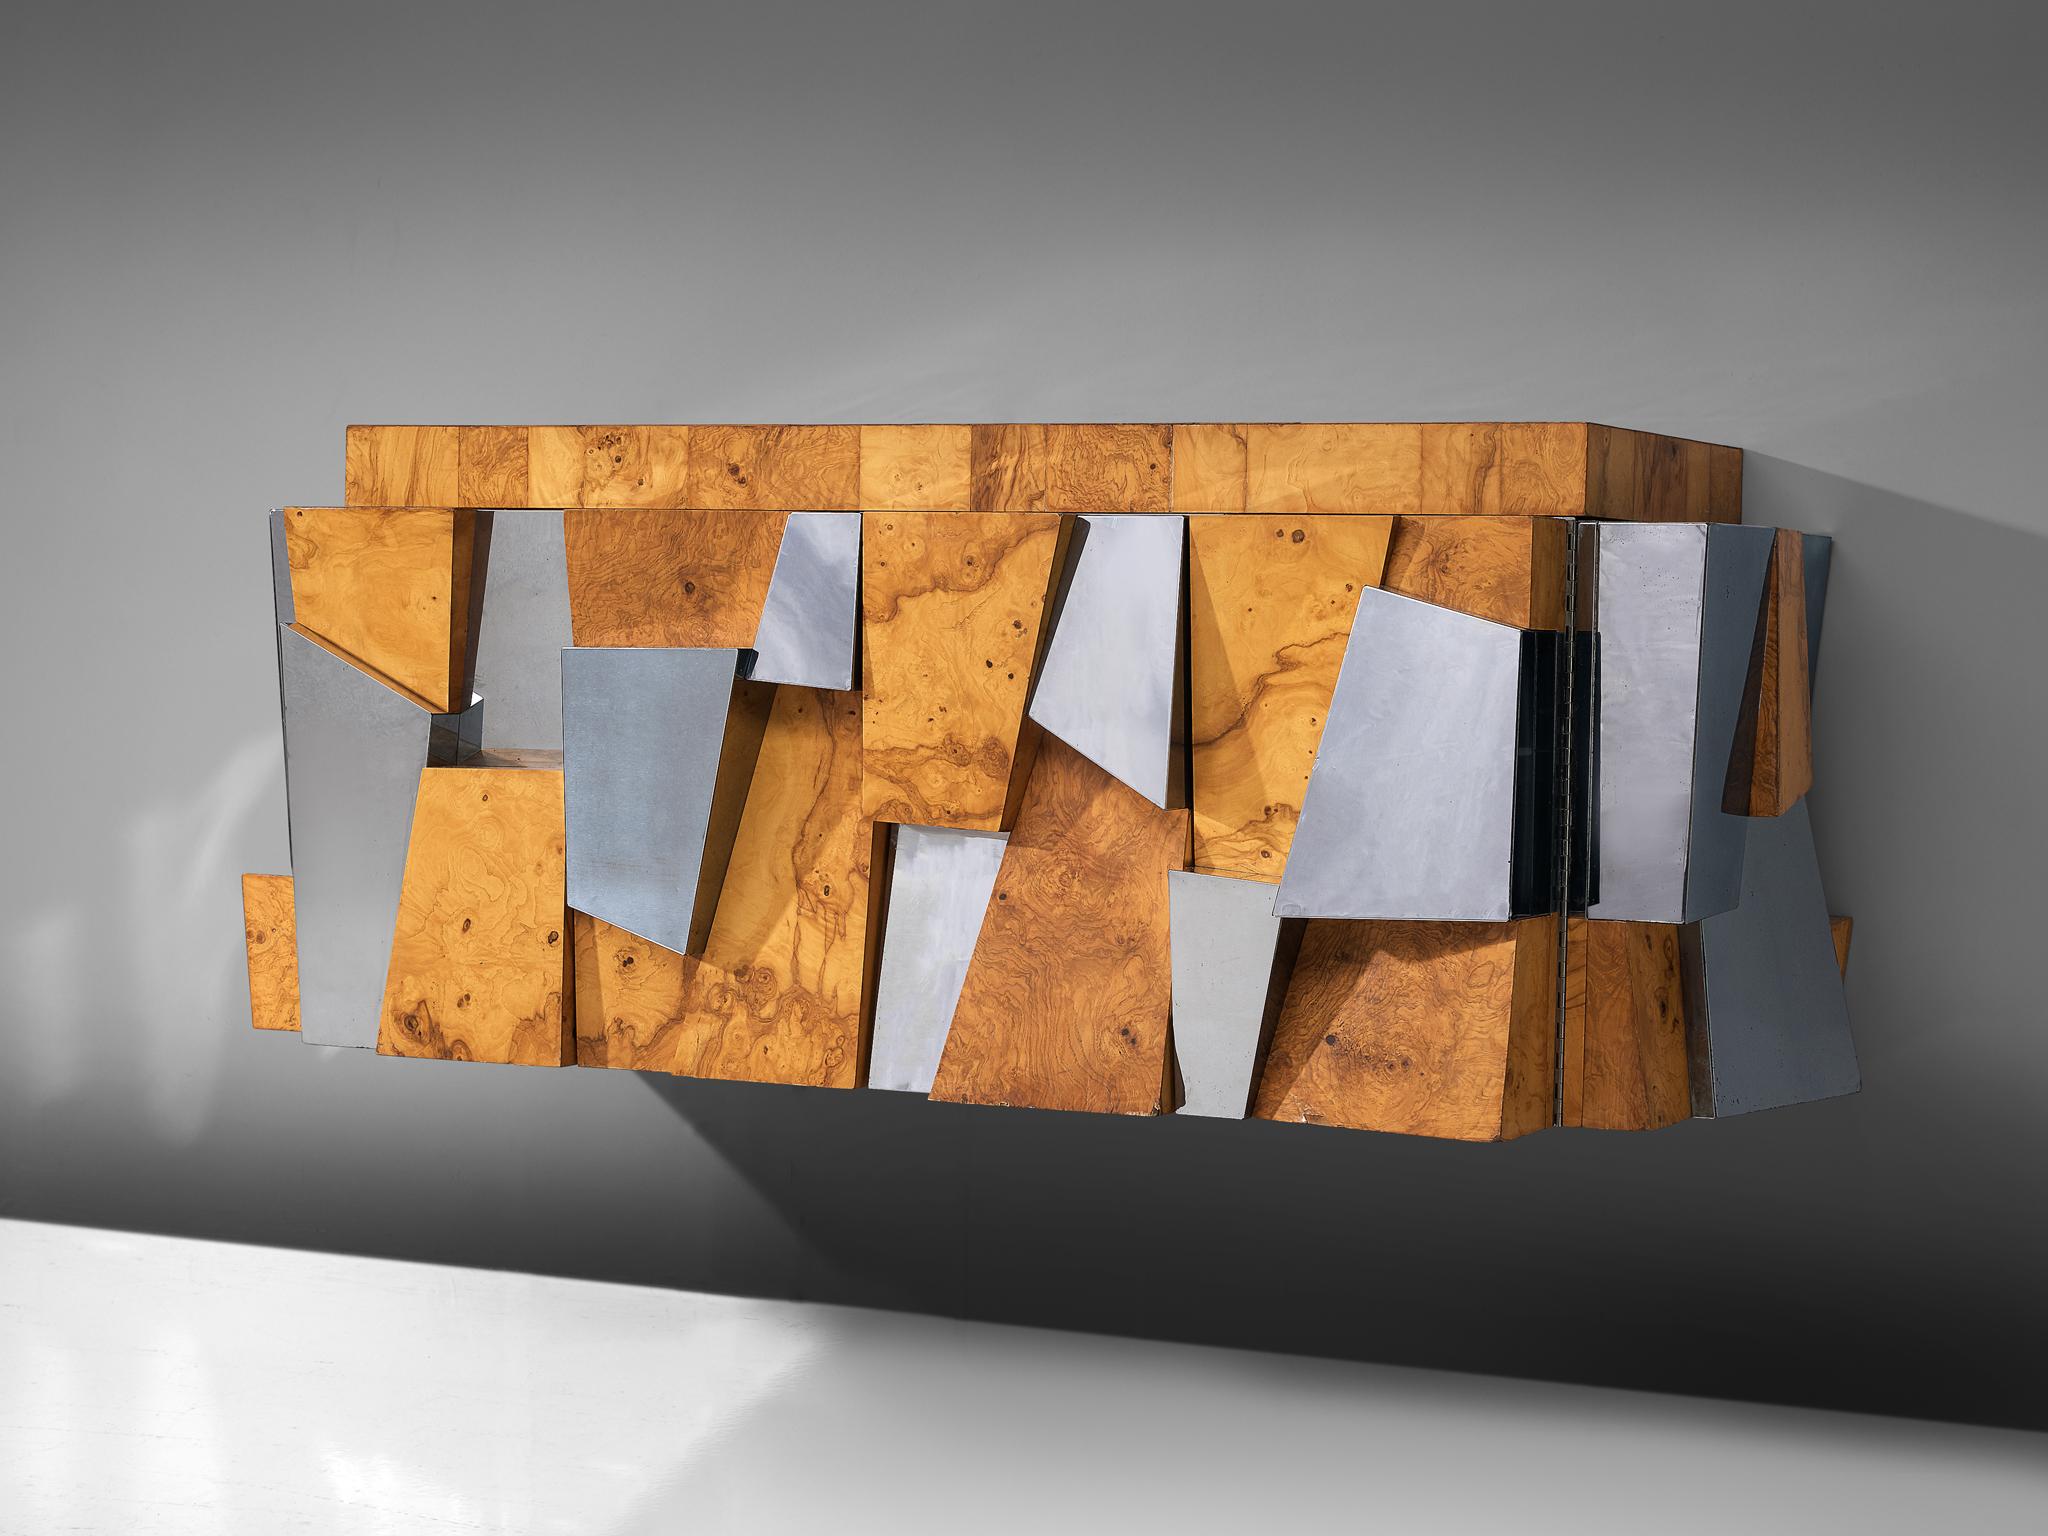 Steel Paul Evans 'Faceted' Wall Sideboard in Chrome and Burl